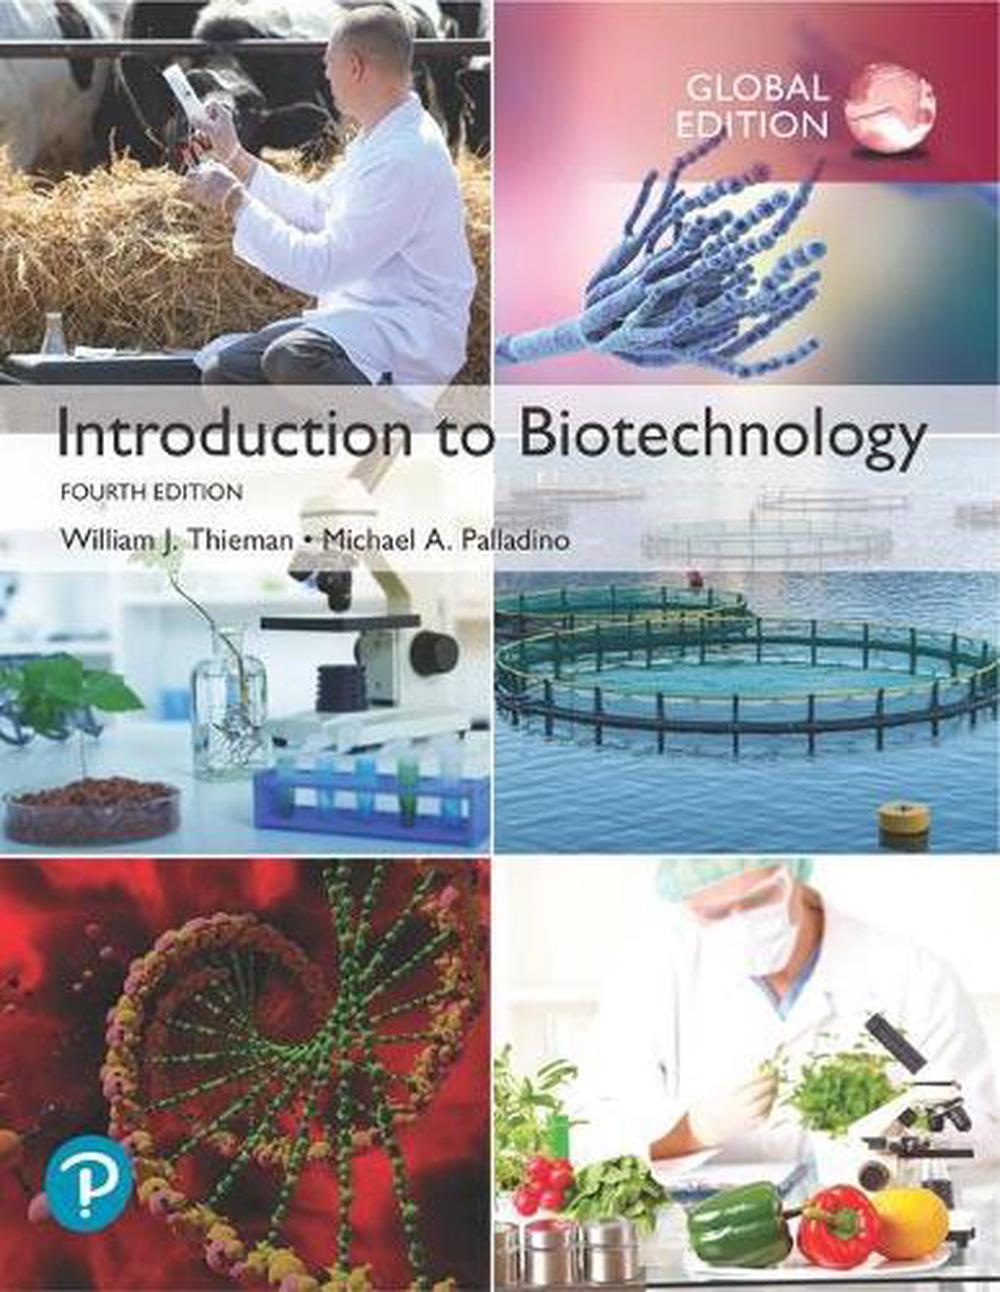 Introduction to Biotechnology, Global Edition 4th Edition by William J